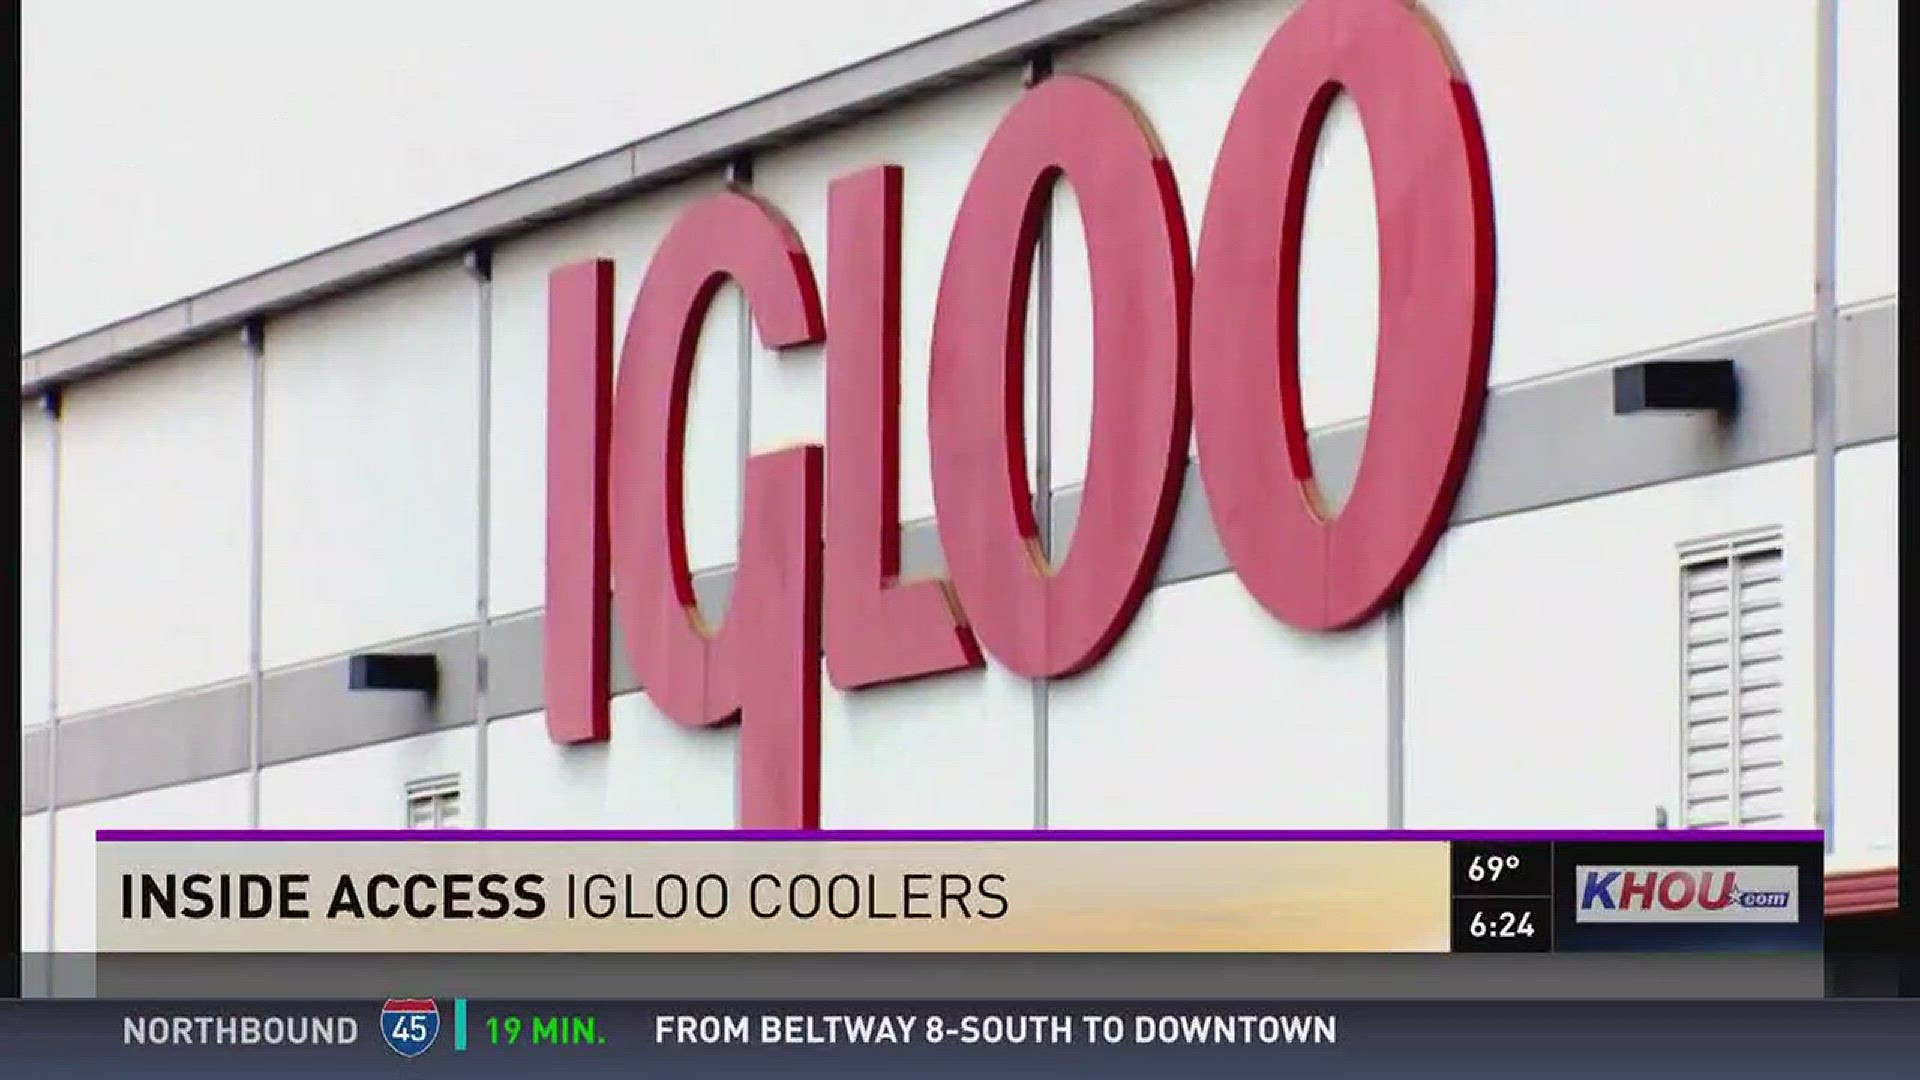 We're getting Inside Access to the Igloo plant in Katy. It's where every Igloo cooler in the world is made!